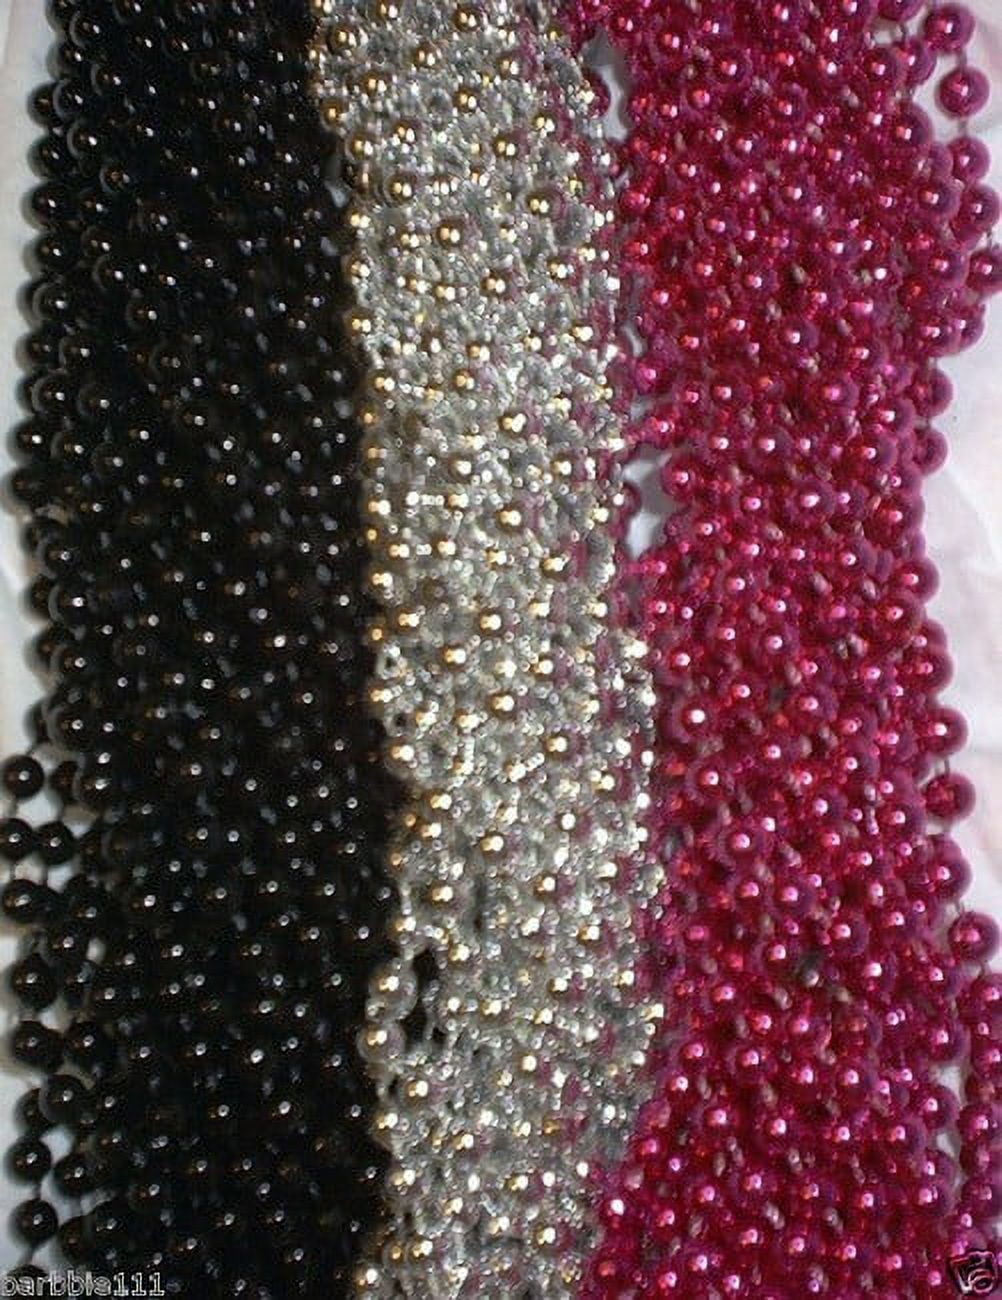 Hollywood Theme Mardi Gras Beads from Beads by the Dozen, New Orleans